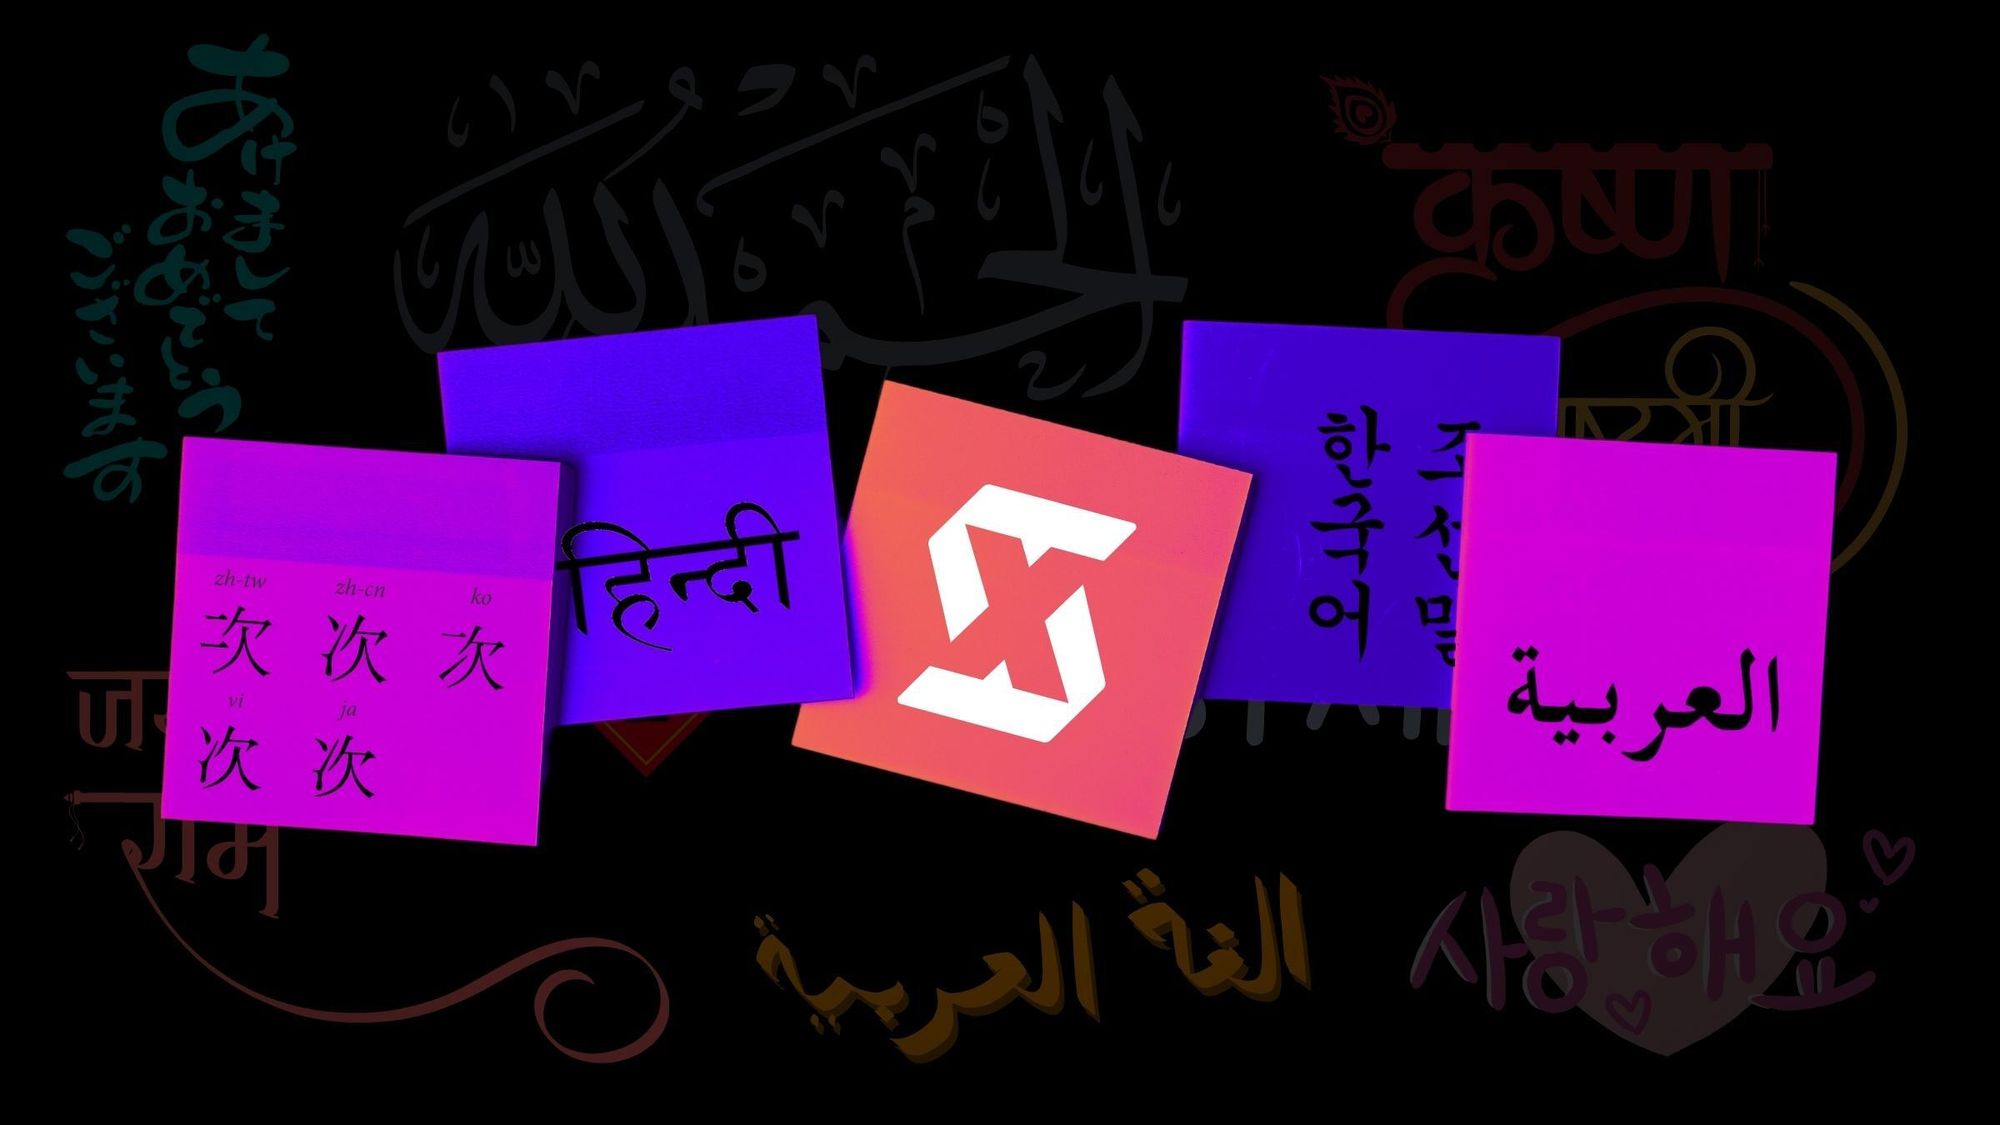 Digital art featuring a white "X" logo surrounded by text in various languages and multicolored boxes on a black background